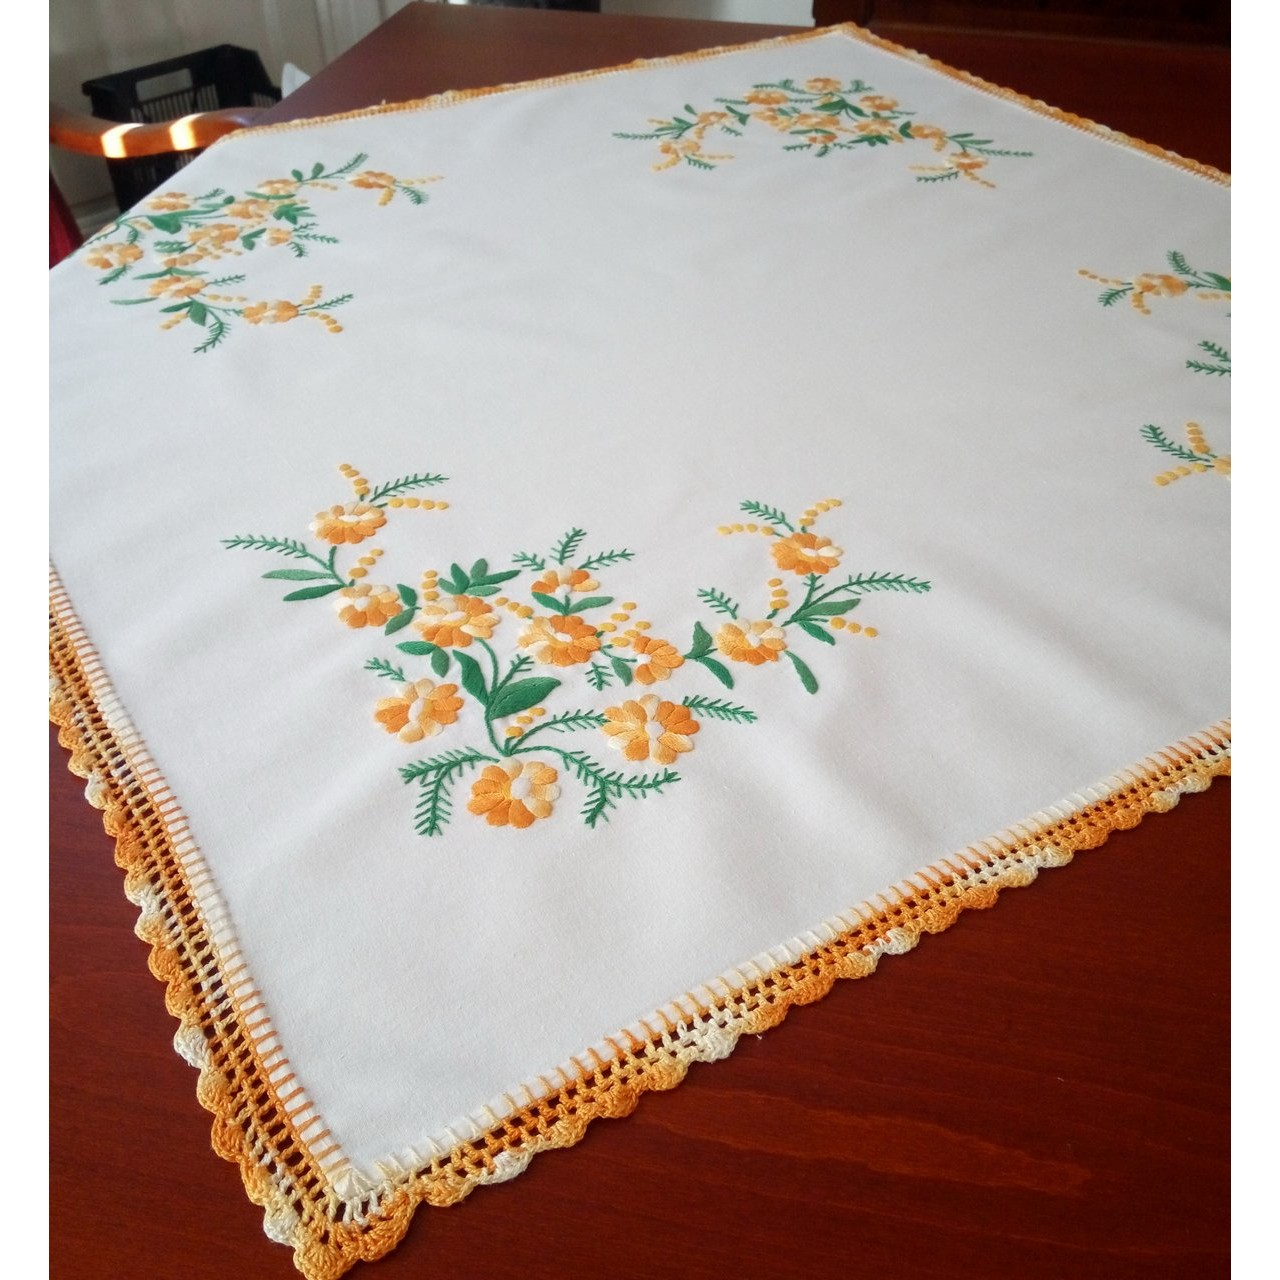 Hand Embroidery Patterns For Tablecloth Tablecloth With Flower Motives Hand Embroidered Tablecloth Summer 324